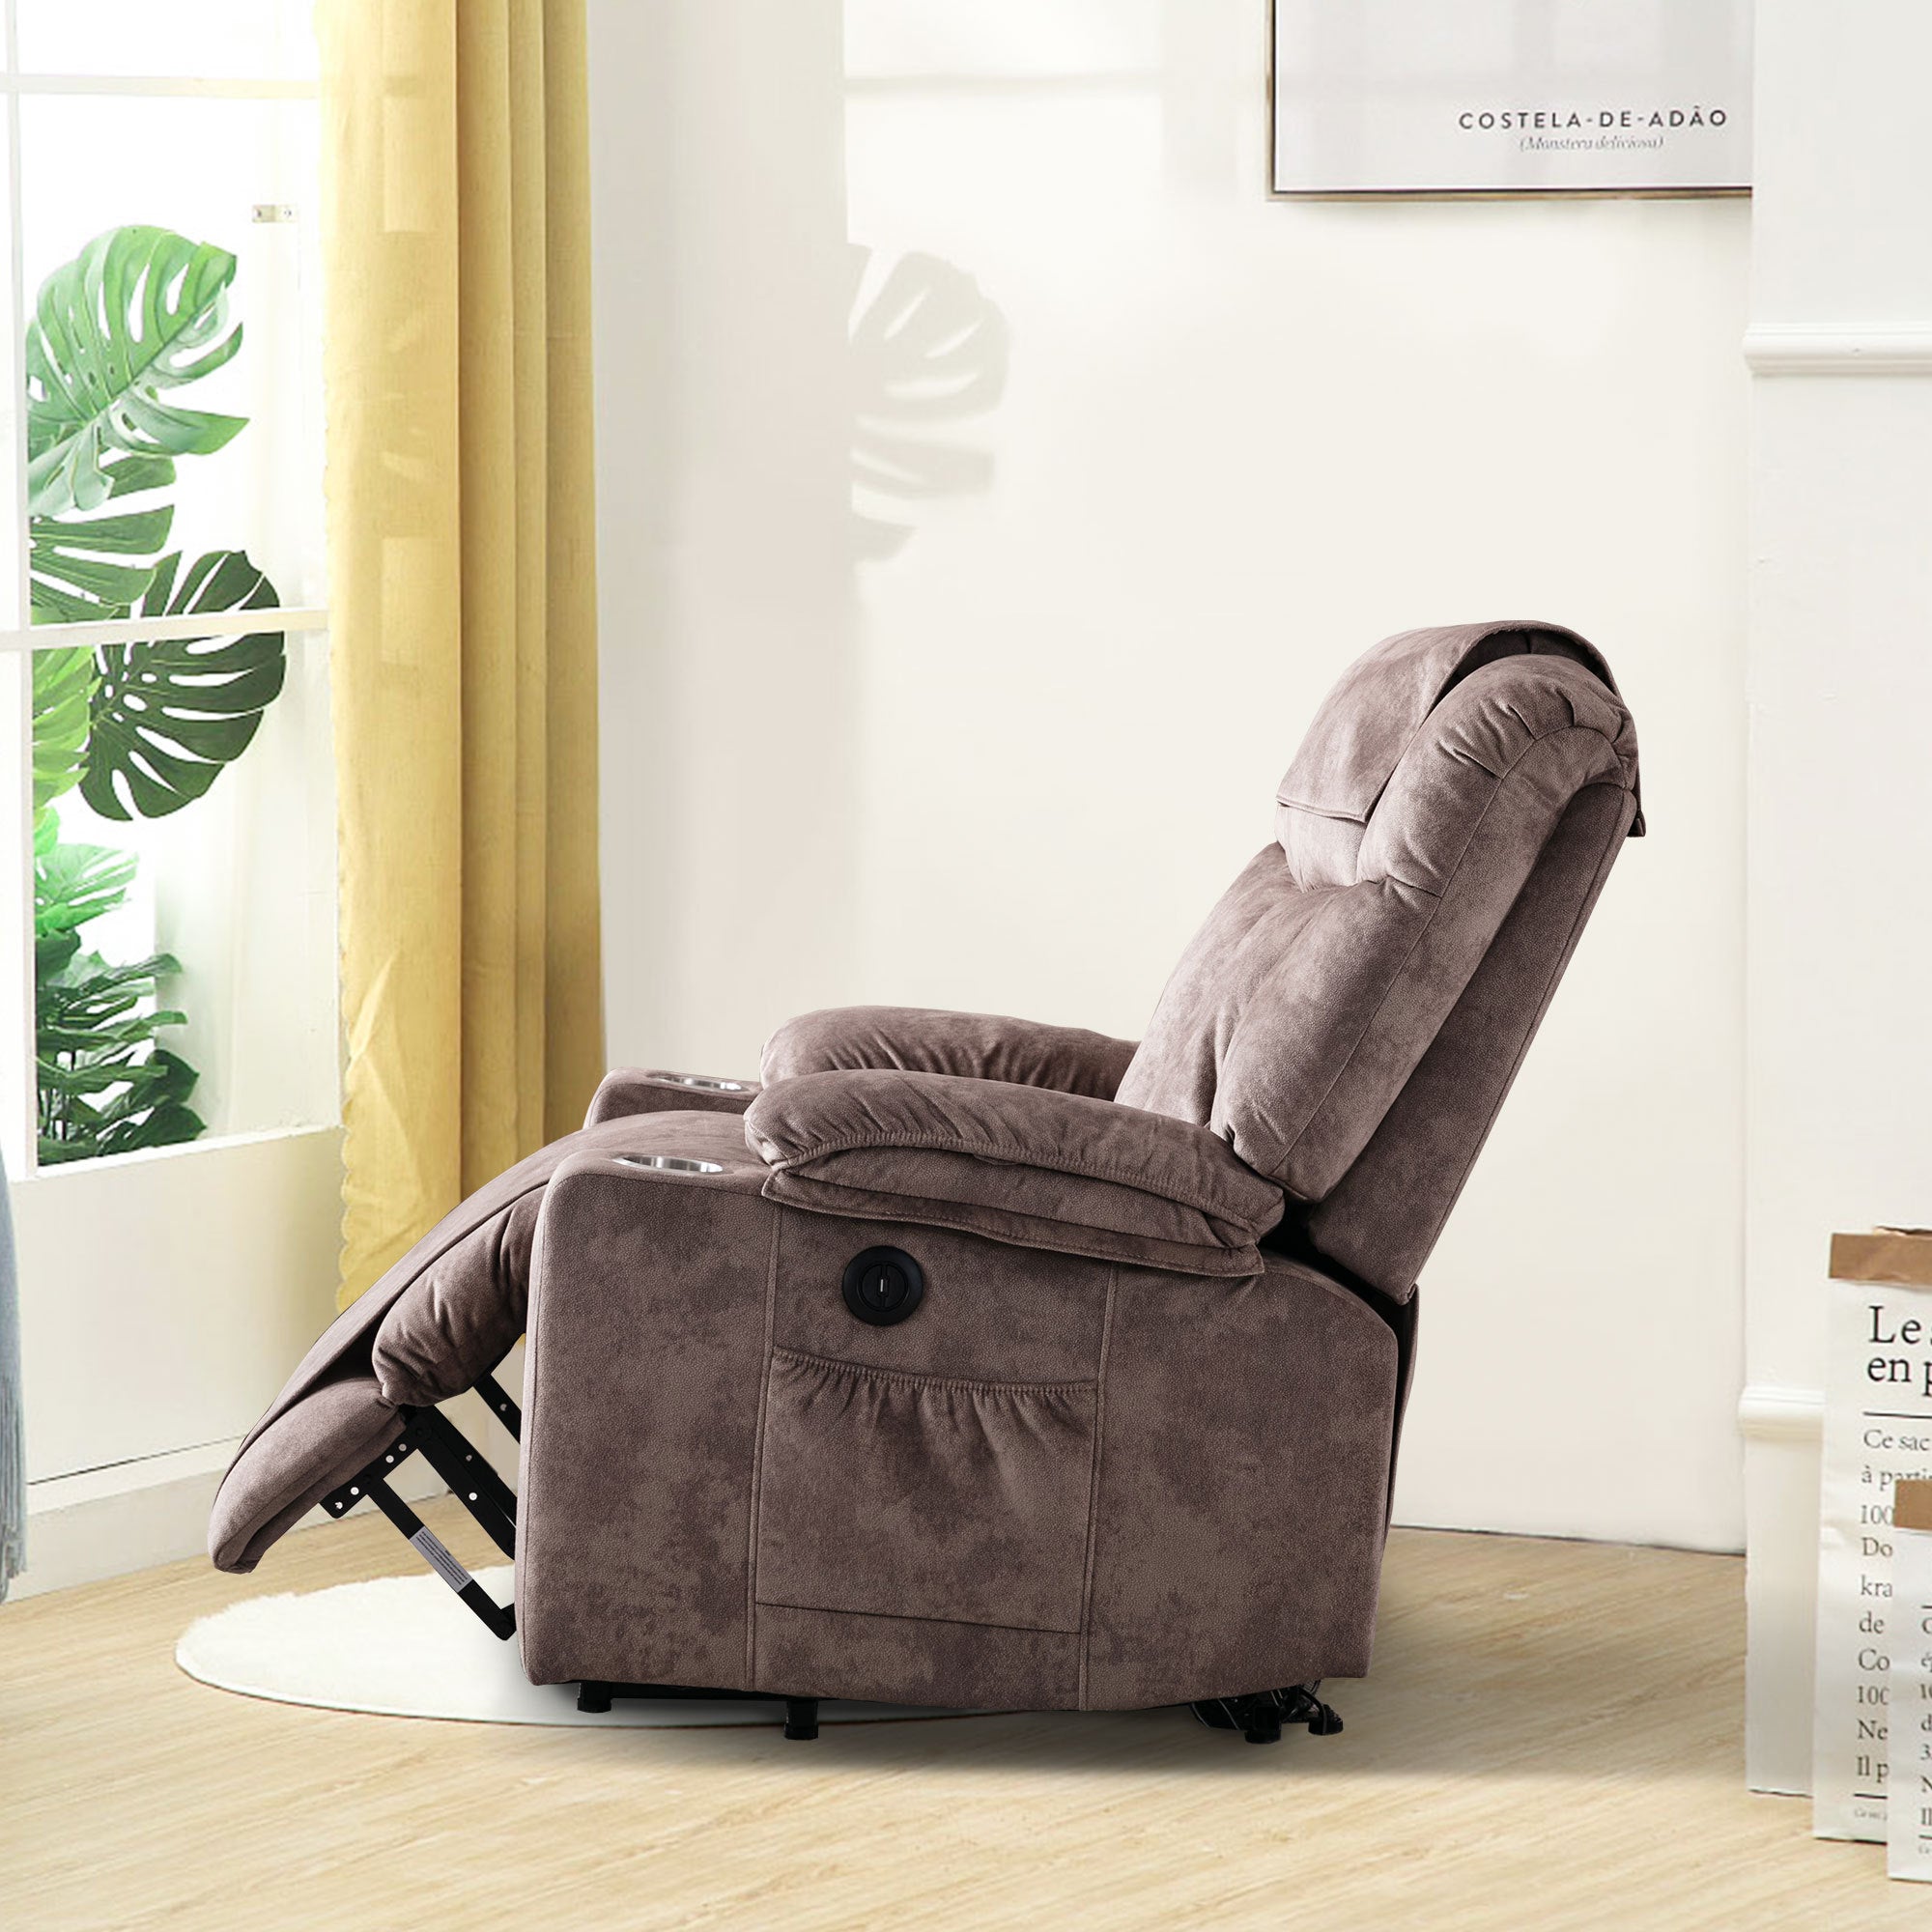 Power Lift Recliner Chair with Washable Cover, window view